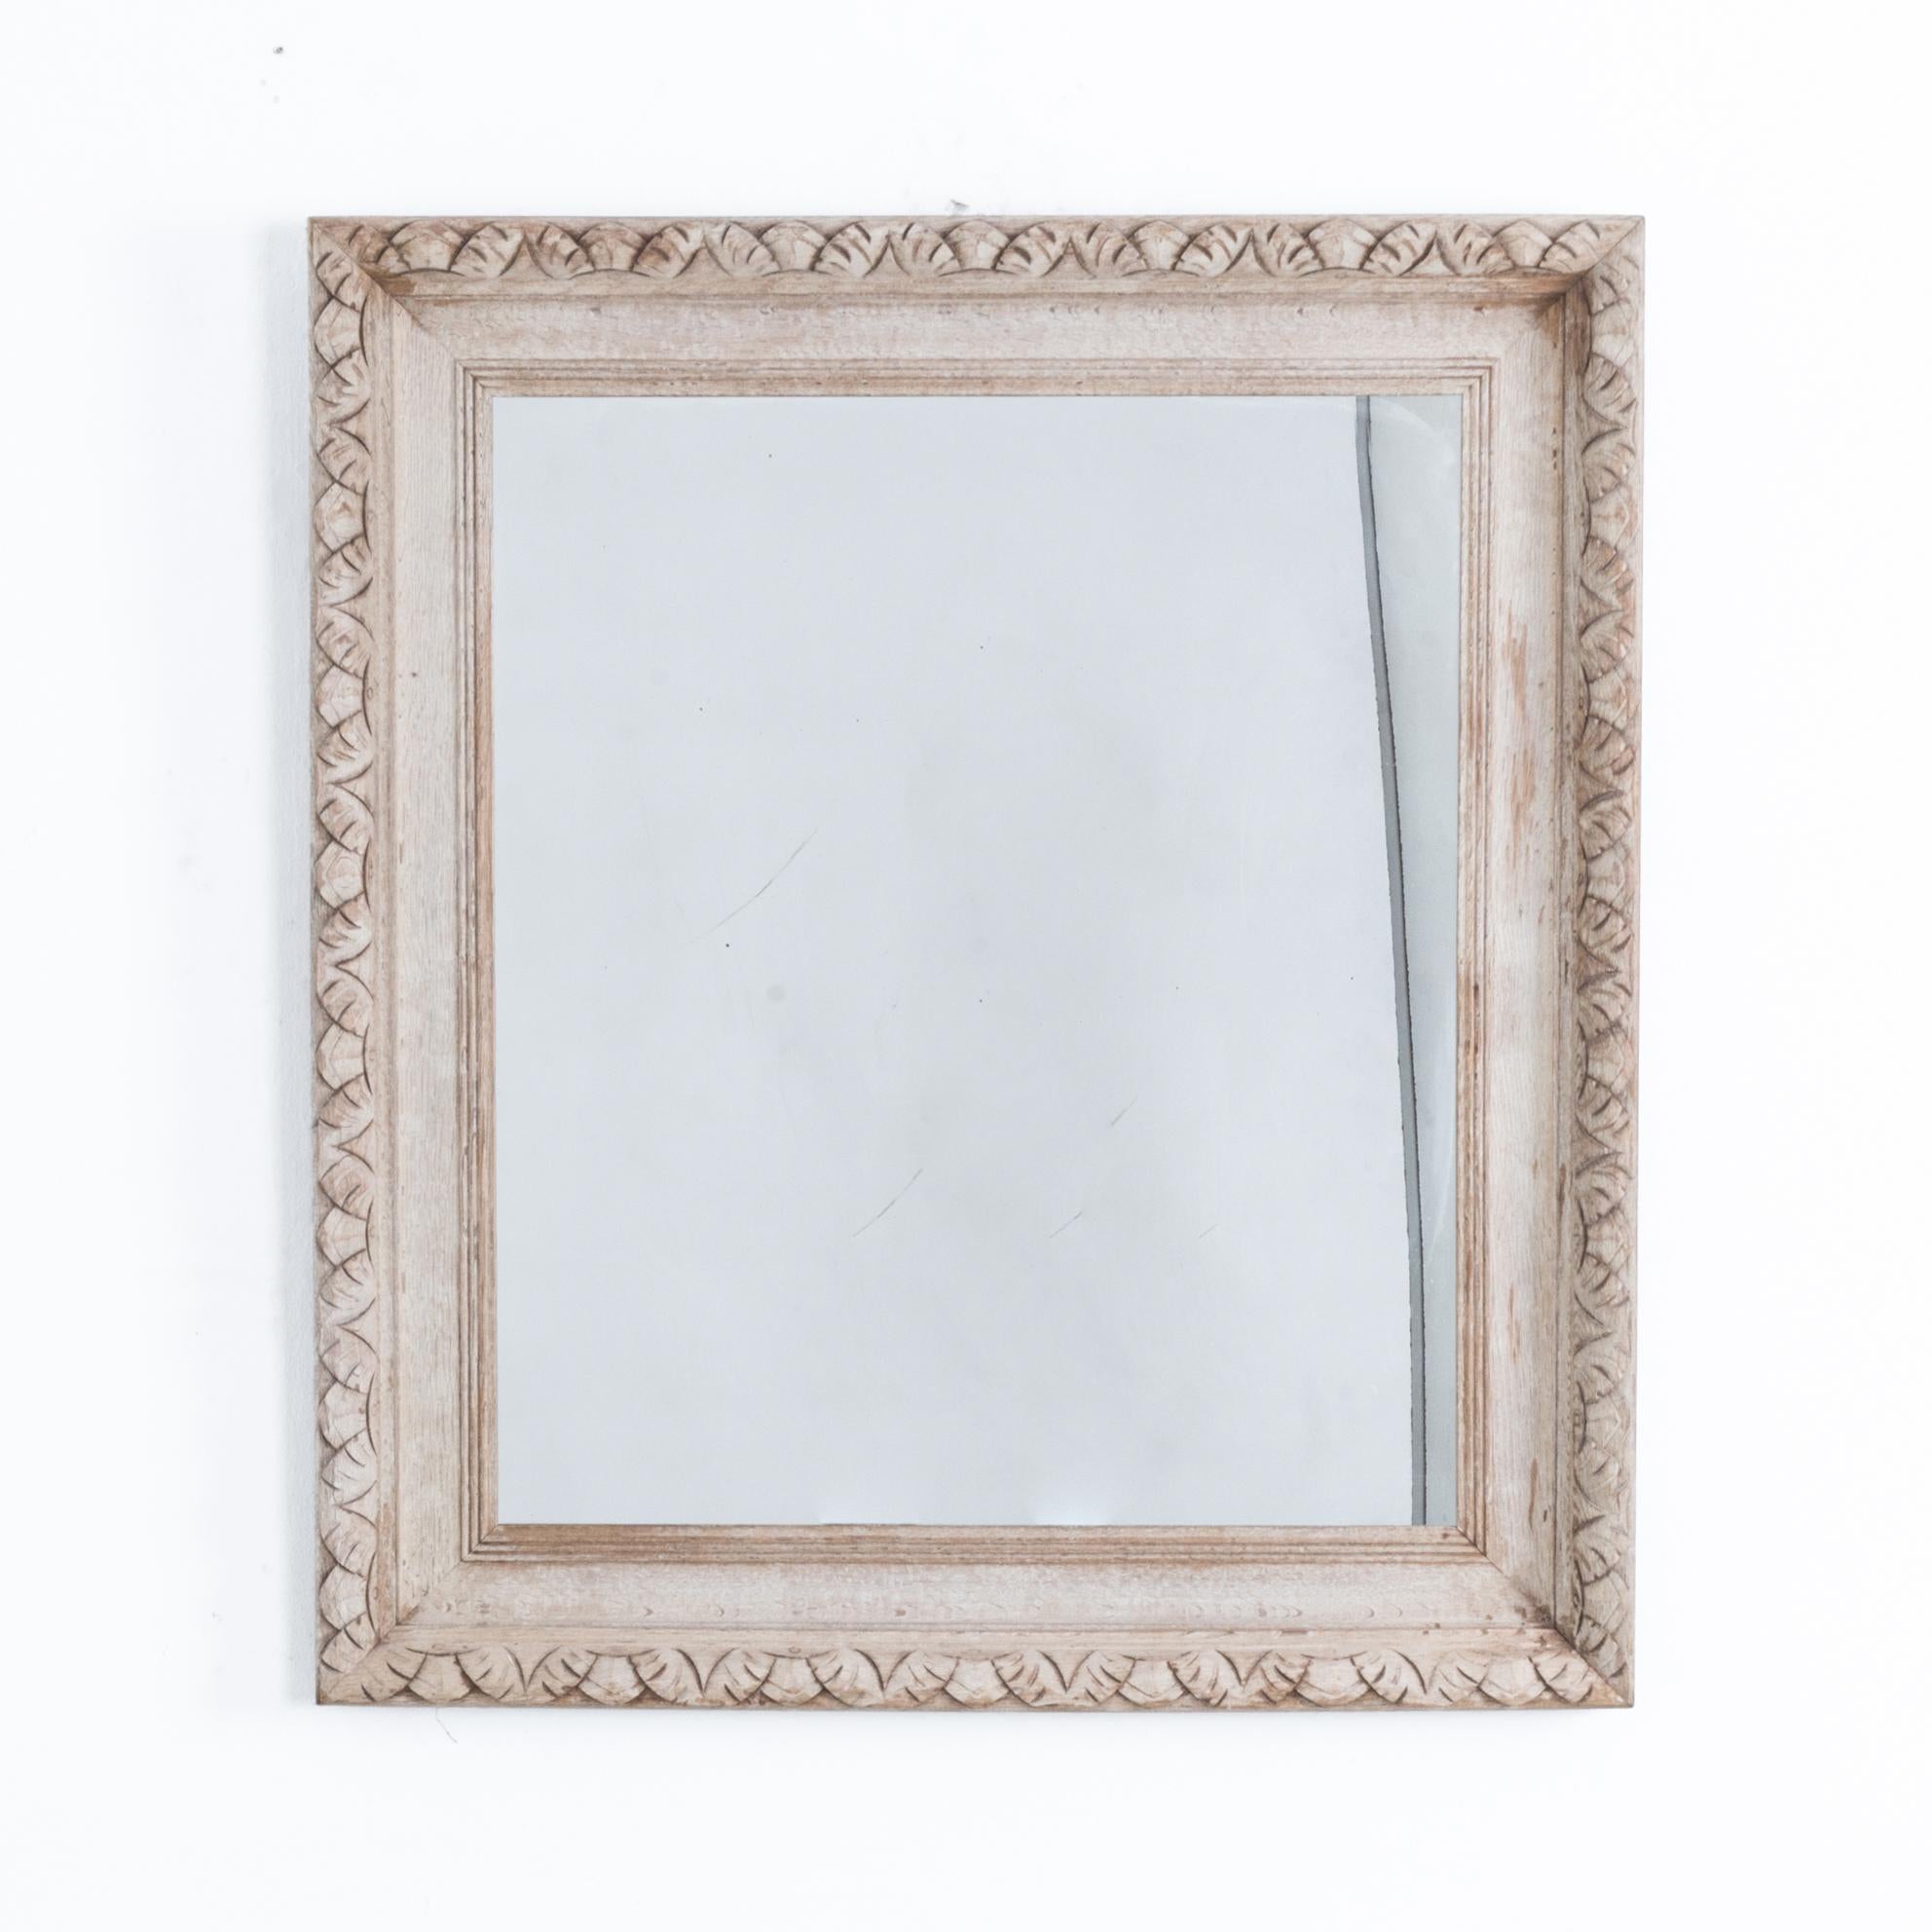 An elegant mirror frame from France circa 1900. An echo from the past, this mirror blends grounded symmetry with intricately carved wooden decoration. Carved leaf patterns recall a classical beauty, elevating simple geometry. Updated in our atelier